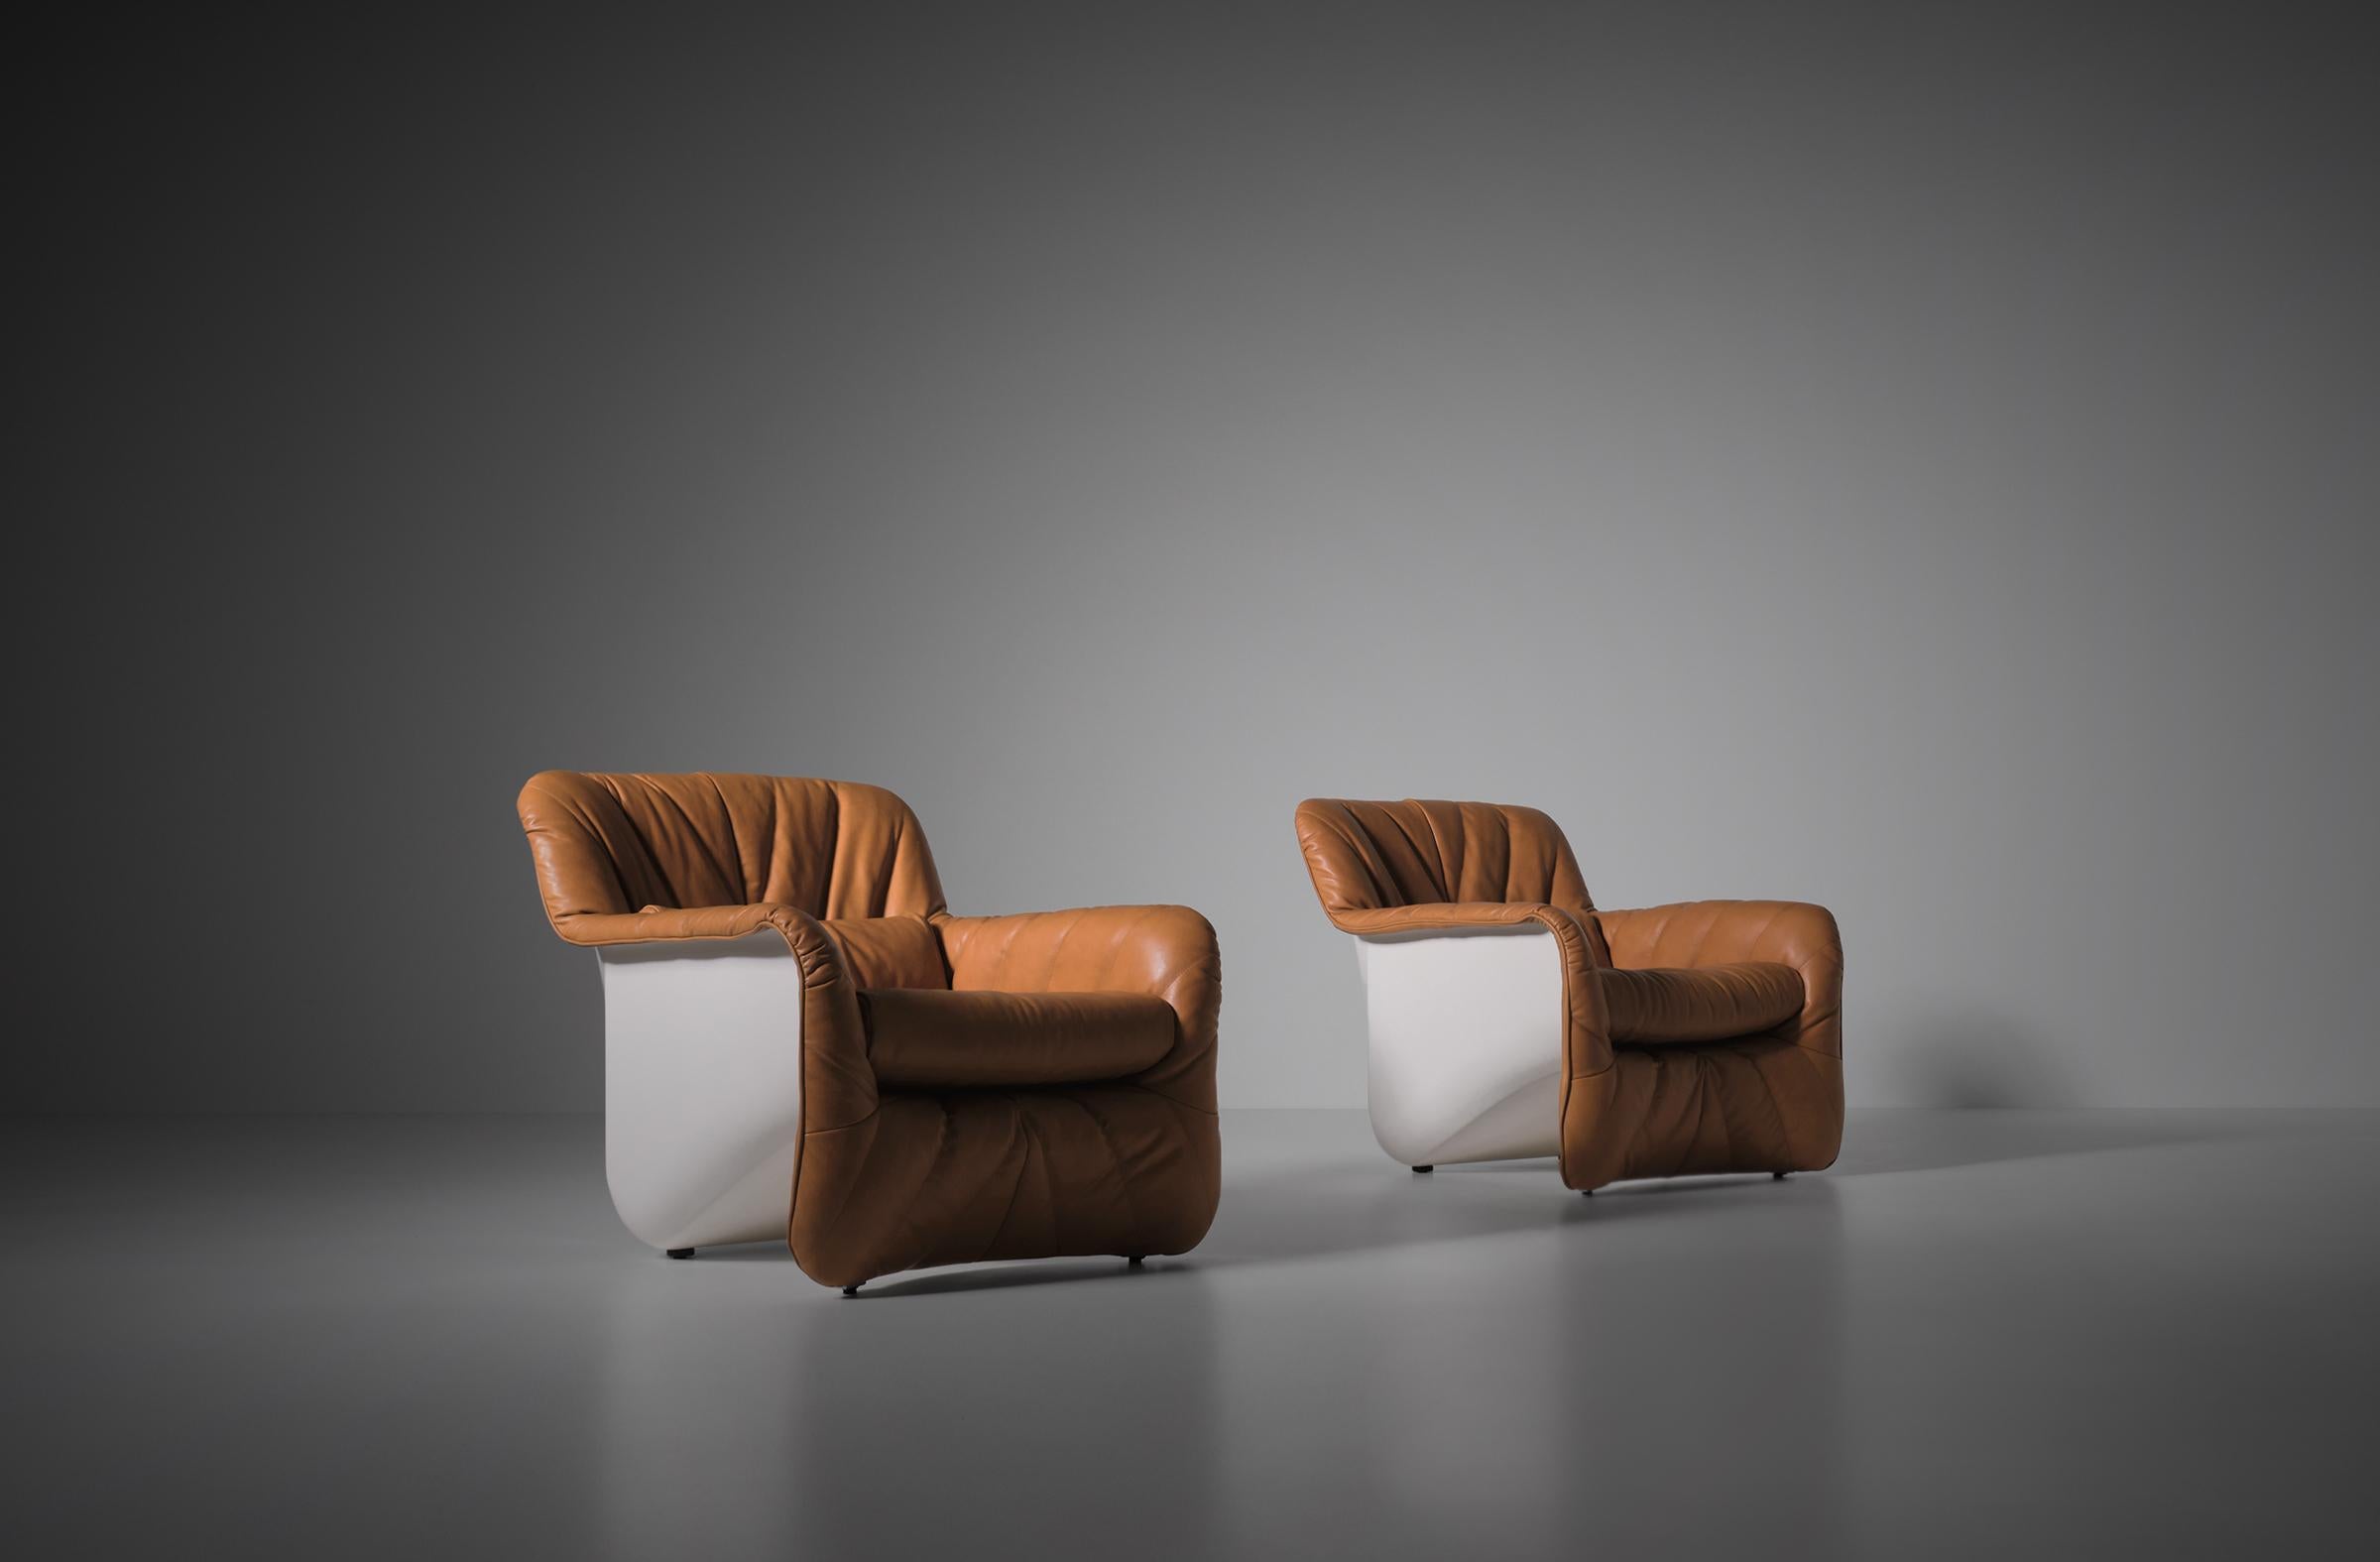 Carlo Bartoli 'Bicia' lounge chairs for Arflex, Italy, 1969. Stunning fiberglass shells with a soft cognac leather upholstery. Very interesting combination of the elegant design and radical use of material.
The leather upholstery is executed with